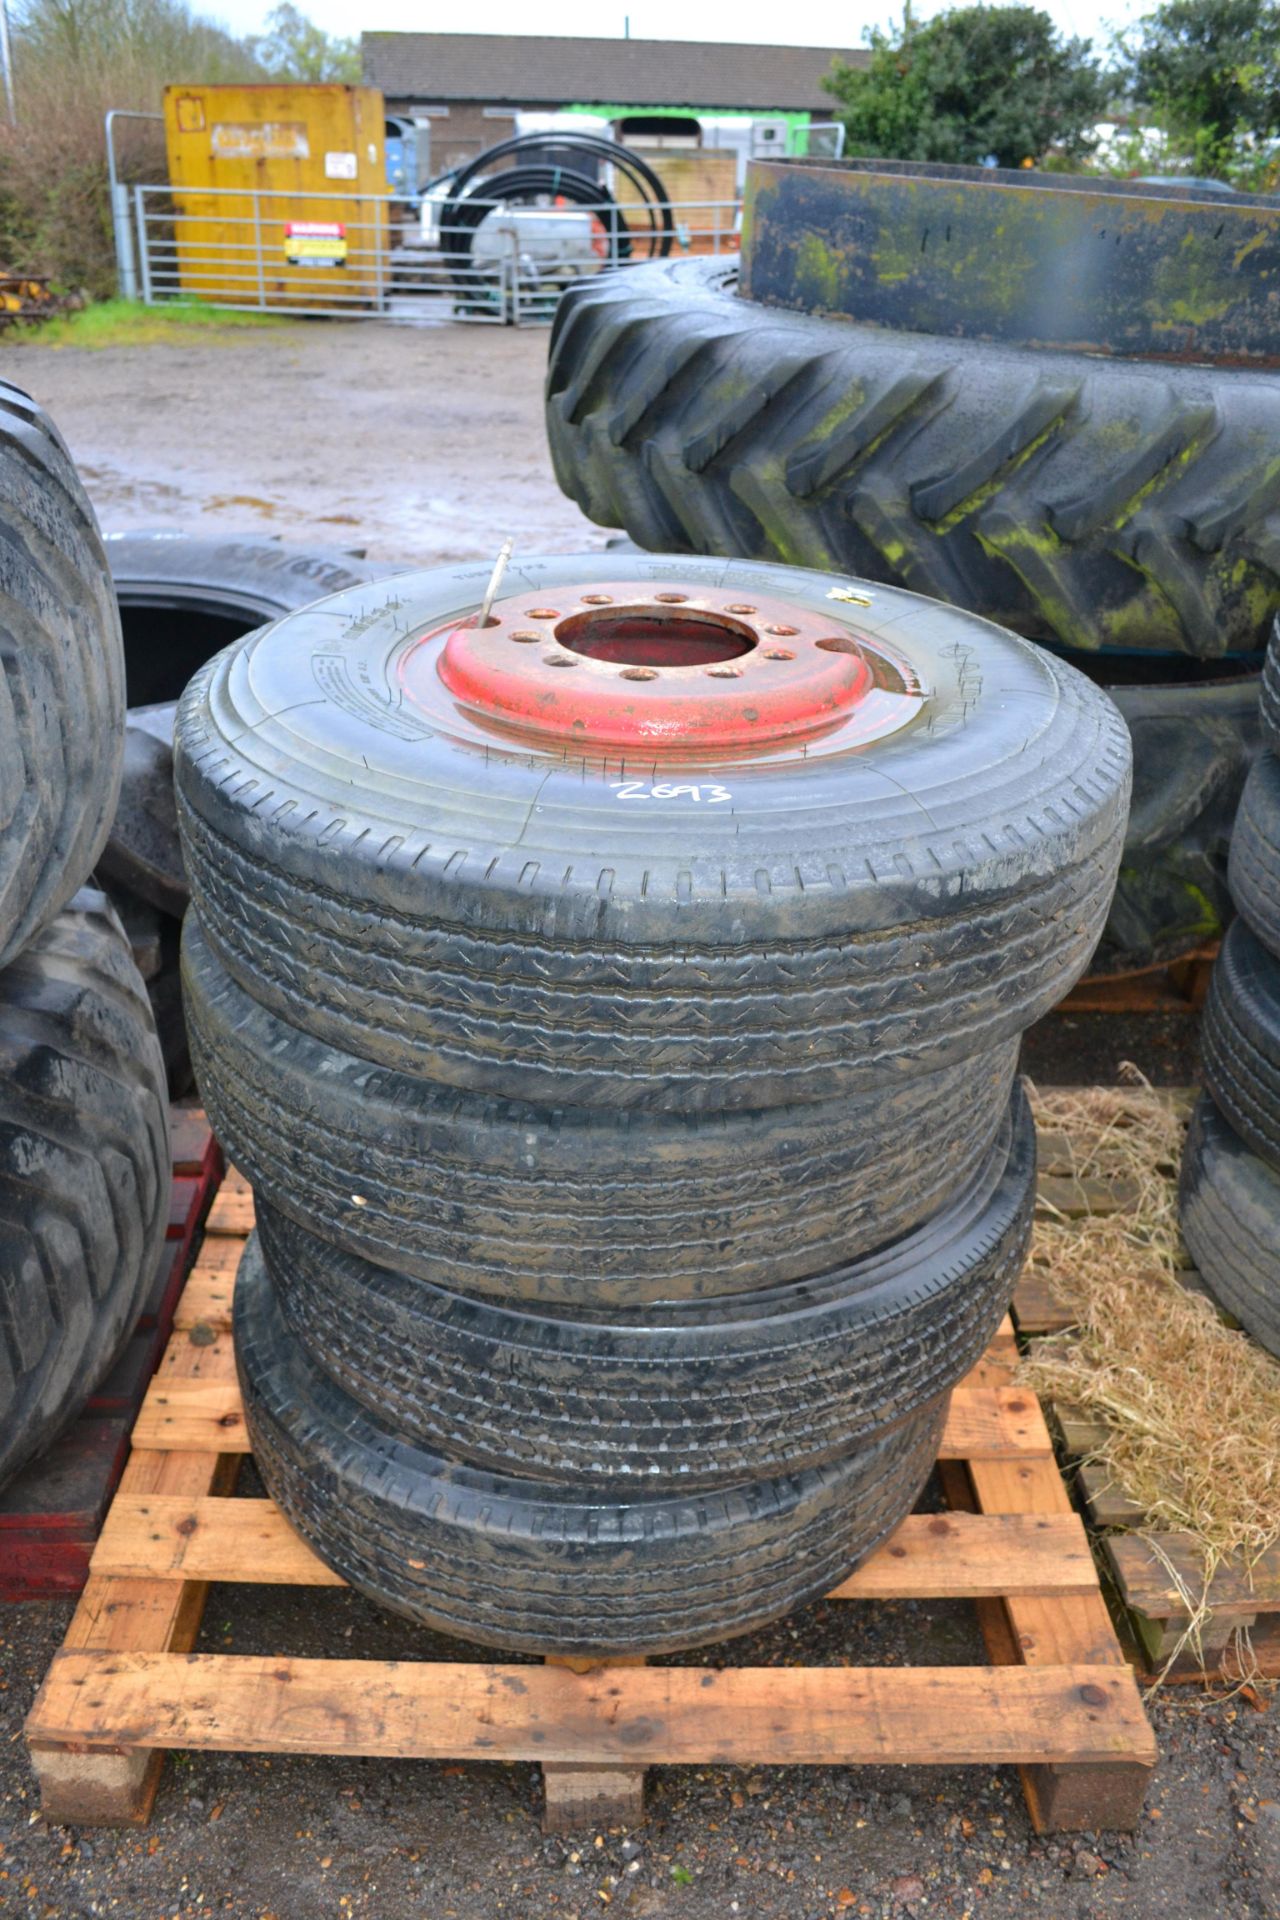 4x 8.25R15 lorry wheels and tyres. V